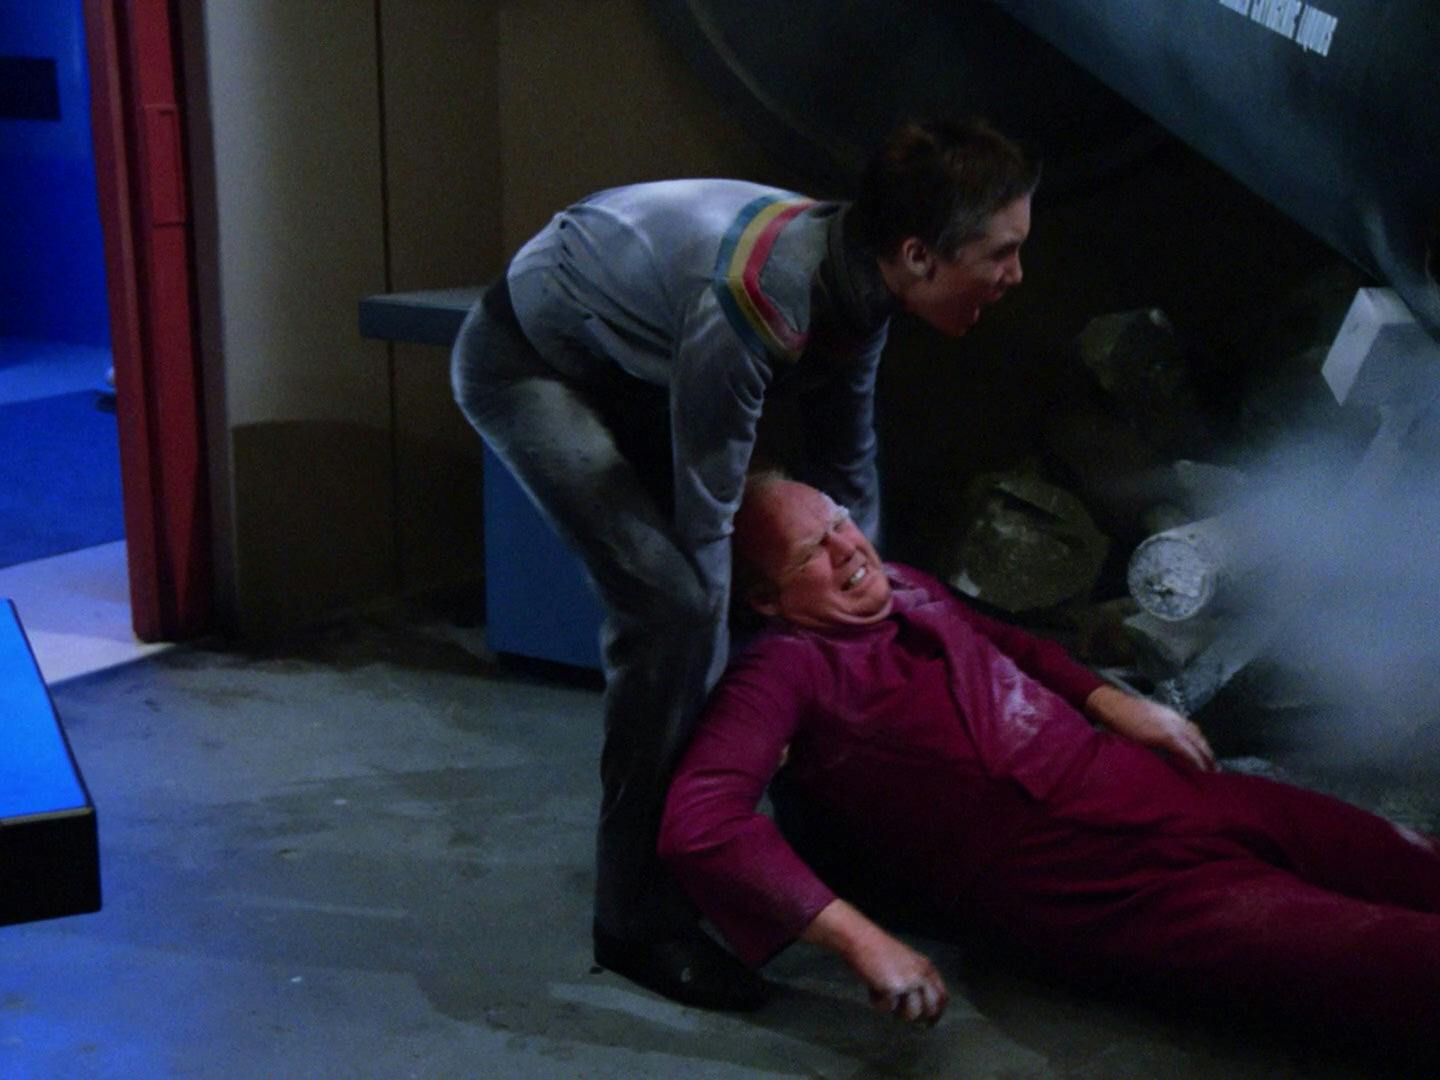 Wesley Crusher pulls a victim out of an explosion, which turned out to be a psych evaluation test on Star Trek: The Next Generation